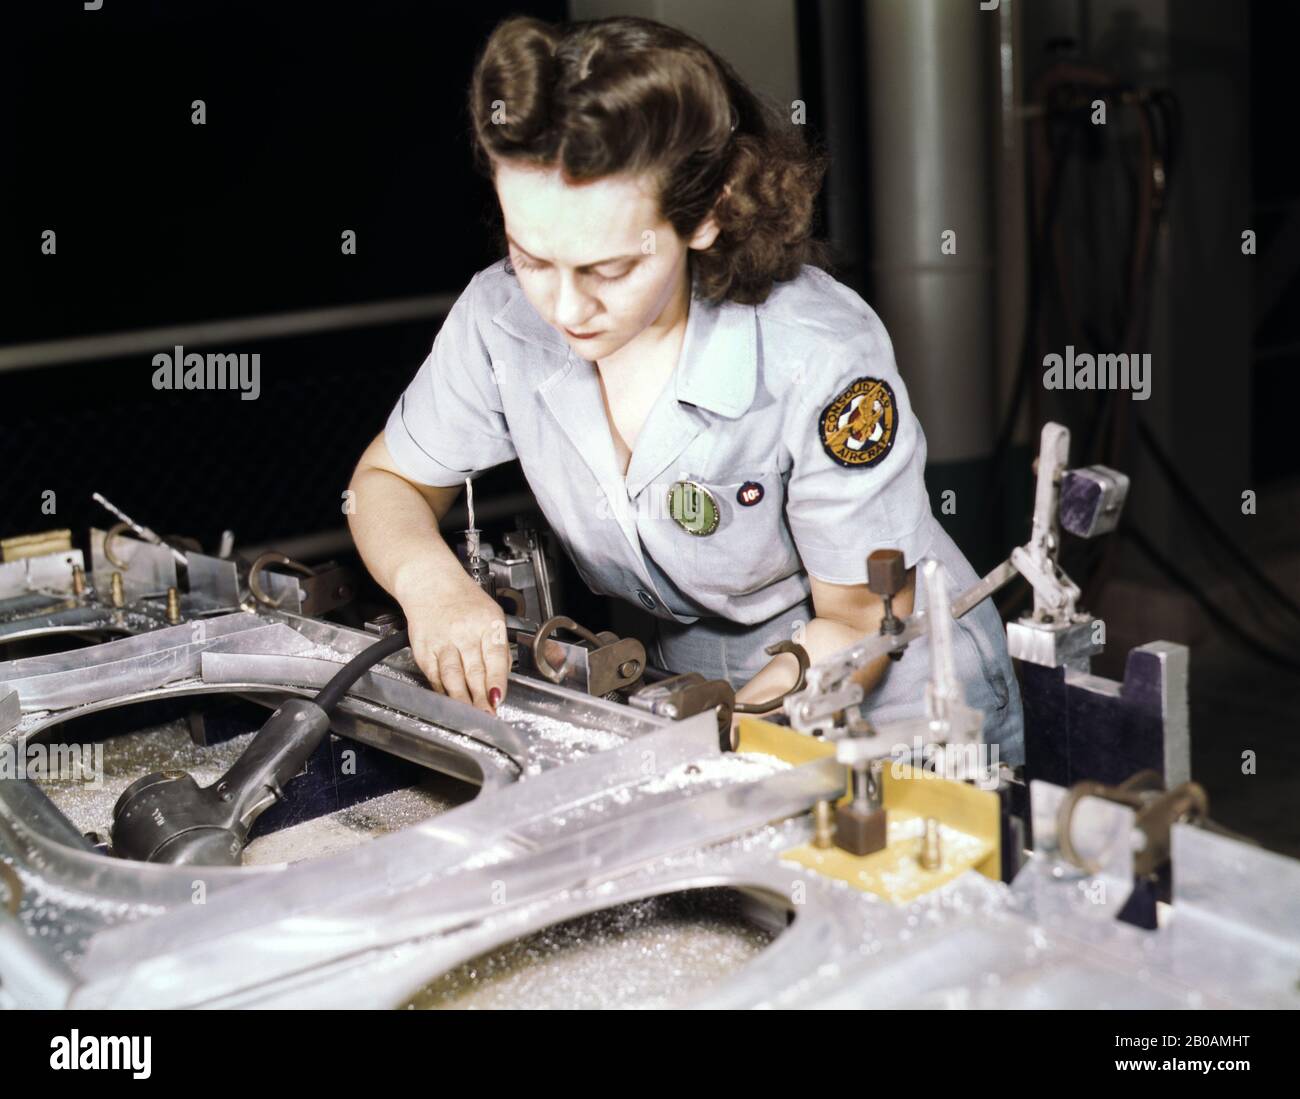 War Production Worker Drilling a Wing Bulkhead for Transport Plane, Consolidated Aircraft Corporation, Fort Worth, Texas, USA, Fotografia di Howard R. Hollem, U.S. Office of War Information, ottobre 1942 Foto Stock